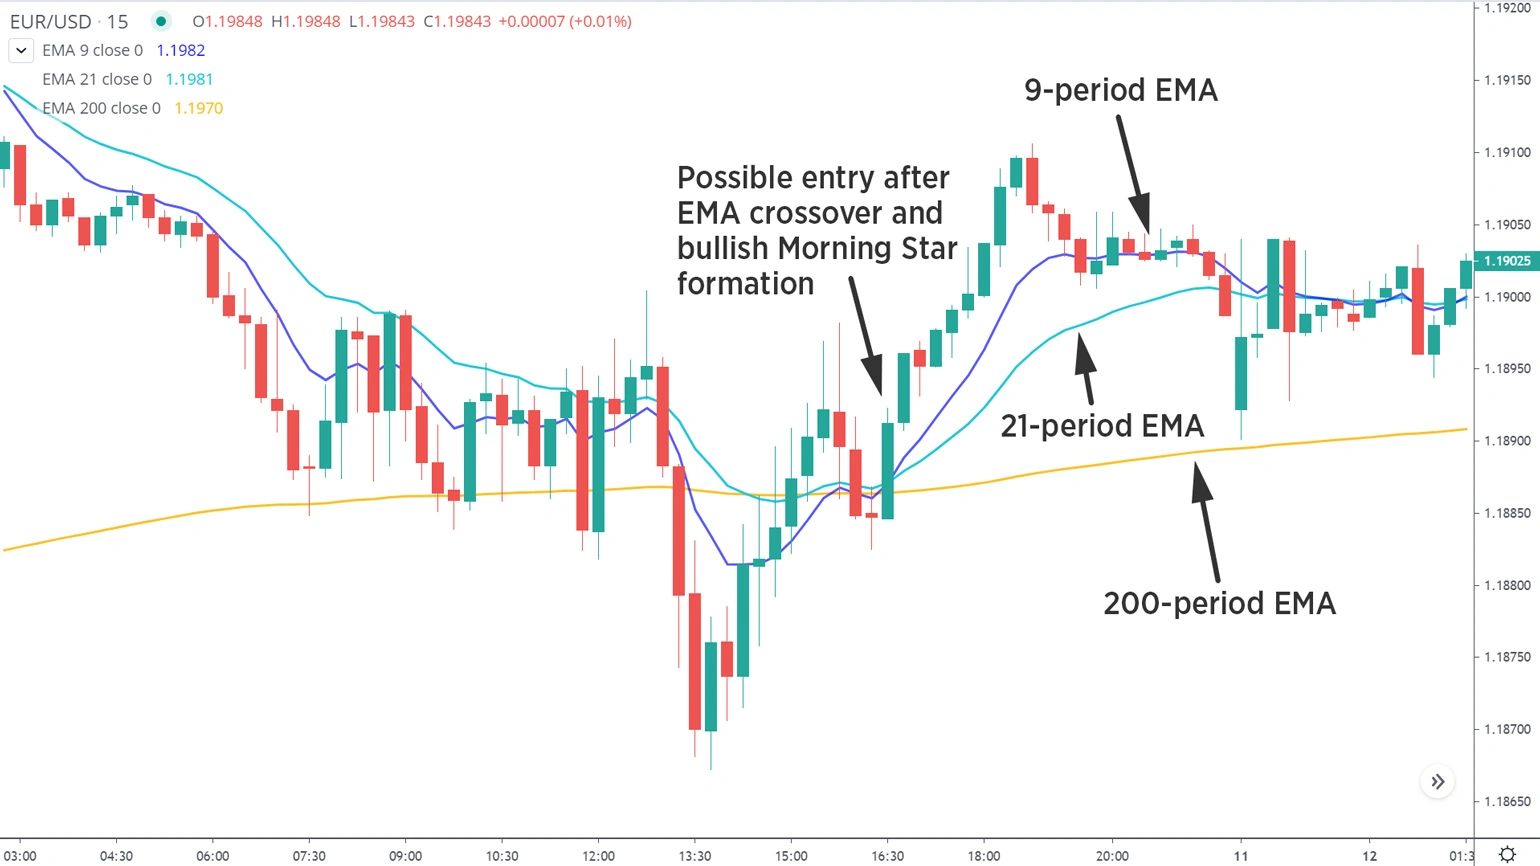 Day trading strategy using moving averages